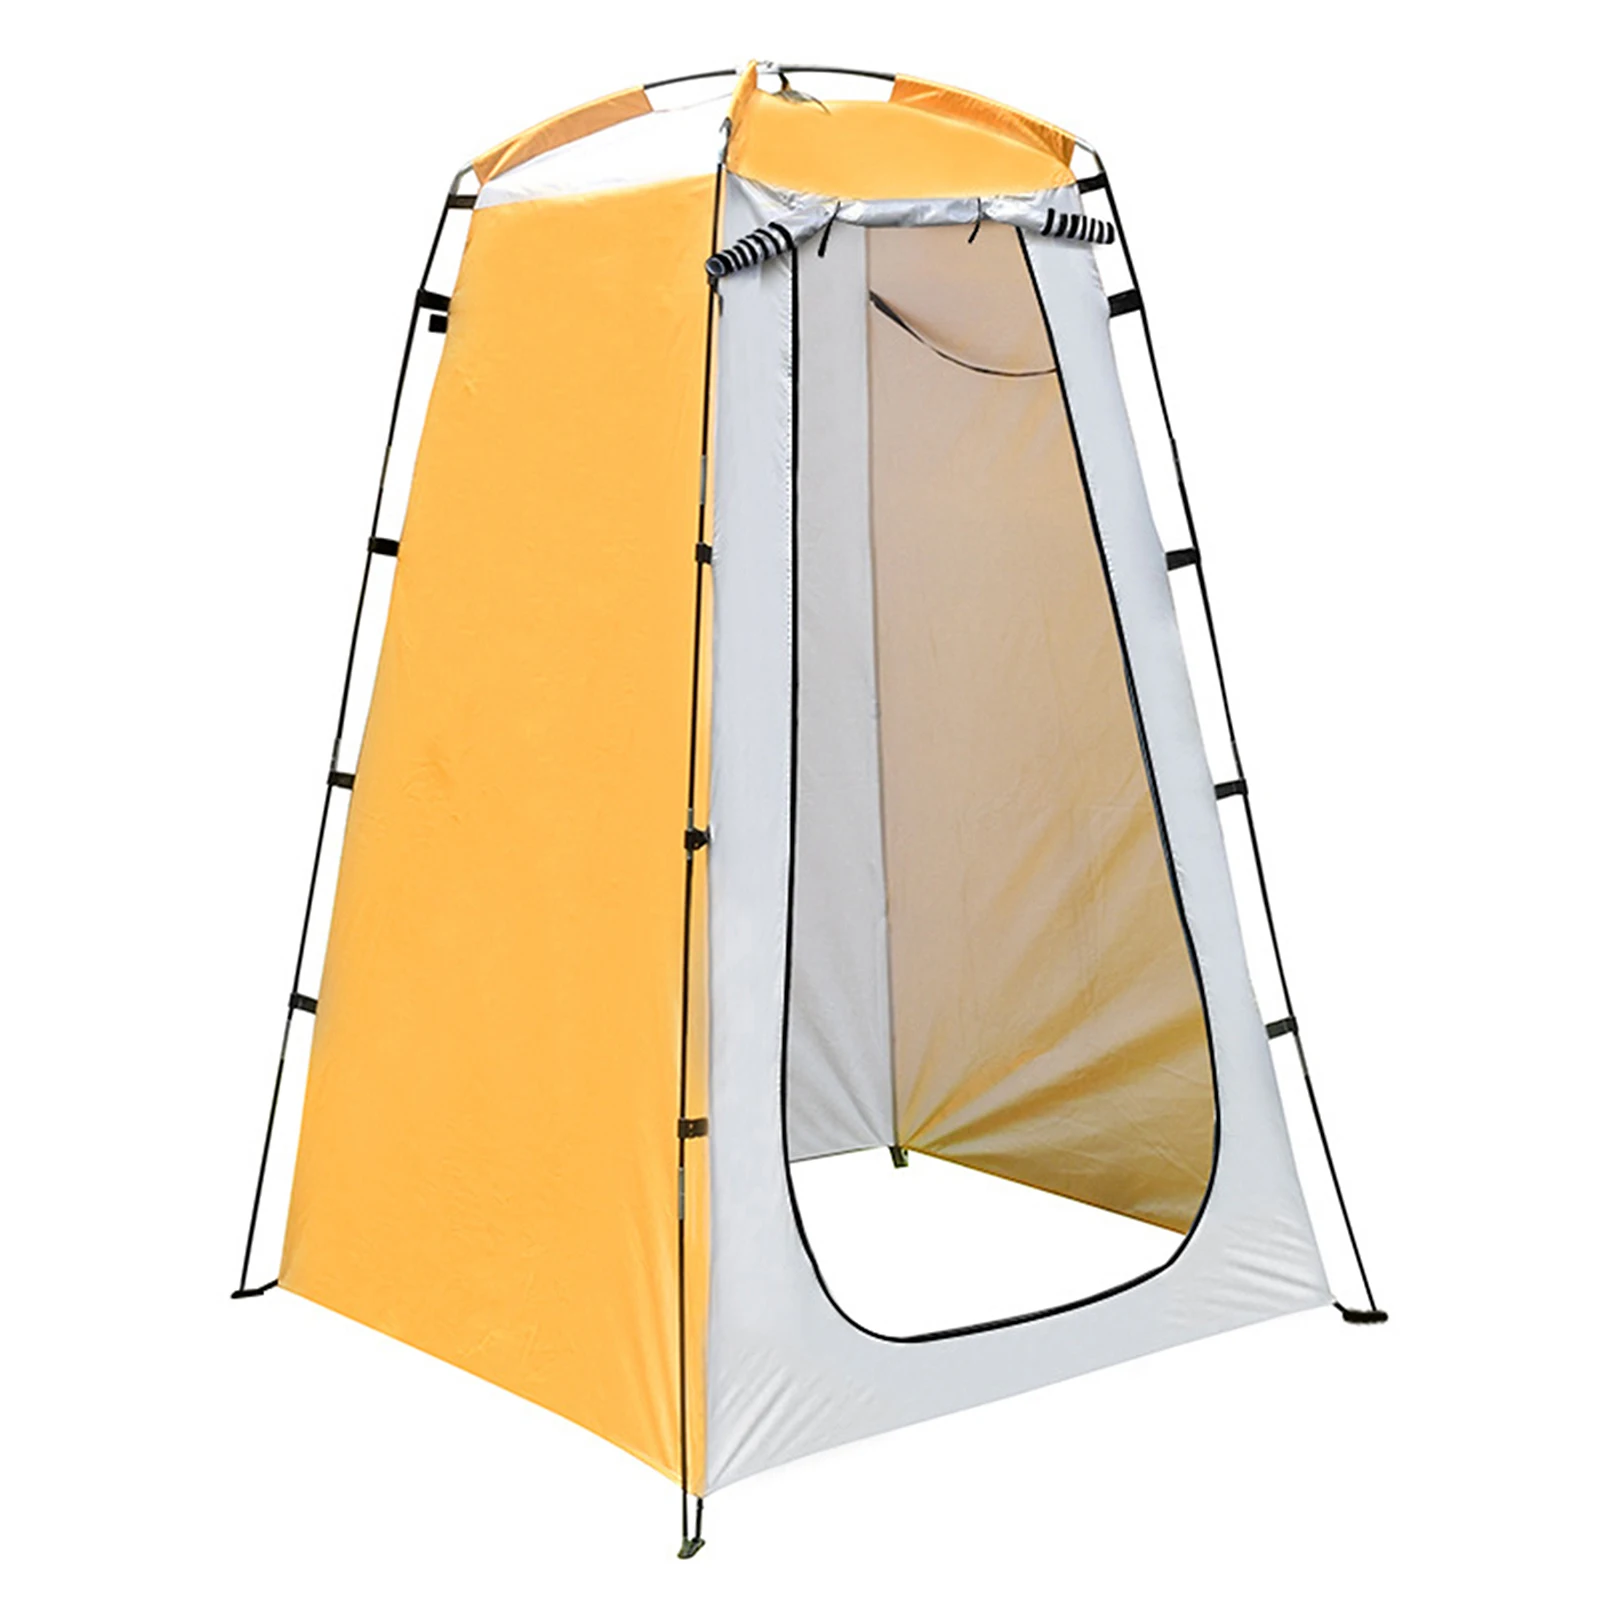 Outdoor Shower Privacy Tent Portable Dressing Changing Room Tent Shelter for Camping Hiking Beach Toilet Shower Bathroom